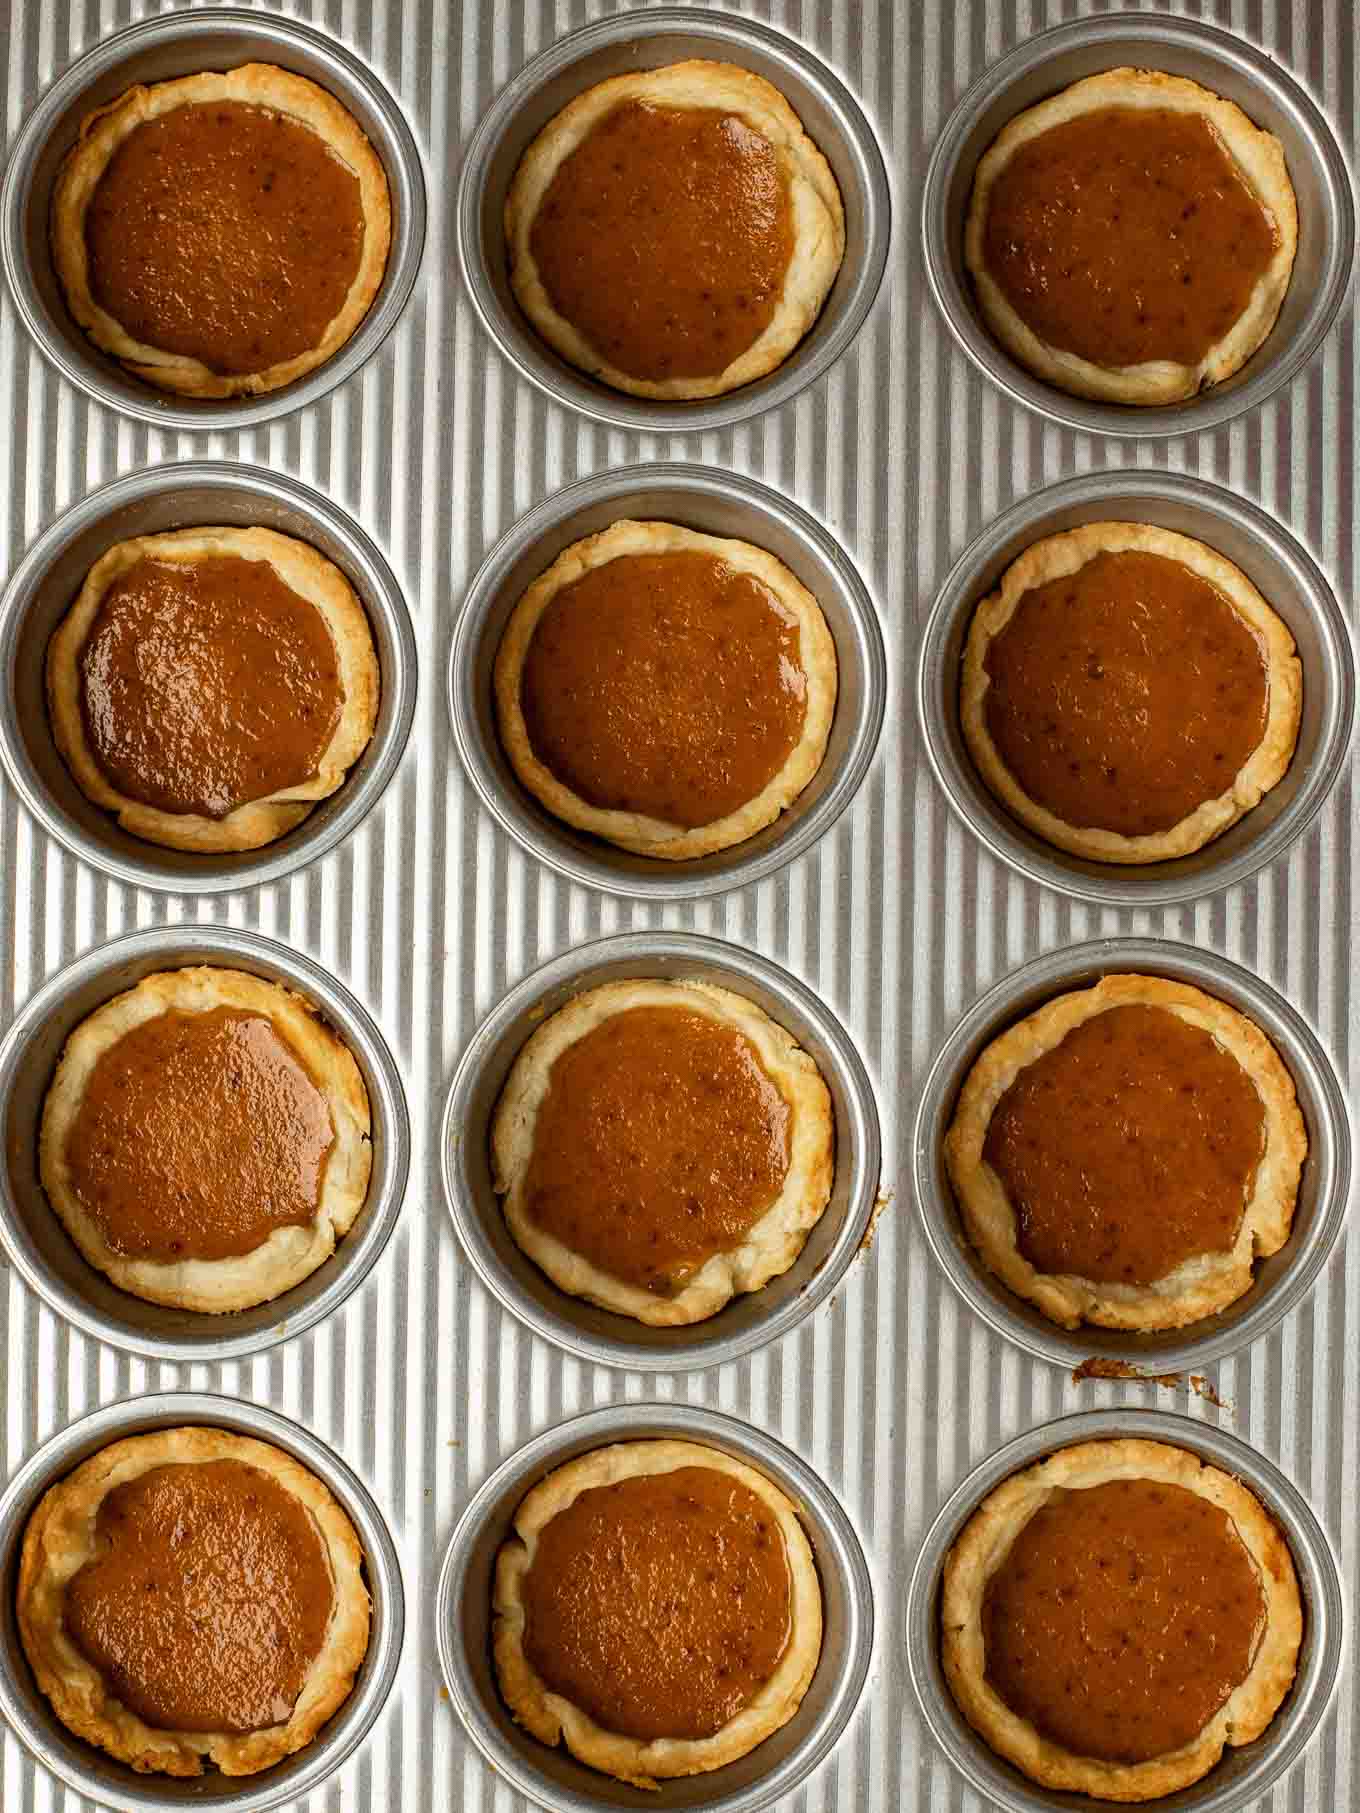 An overhead view of baked mini pumpkin pies in a muffin pan.